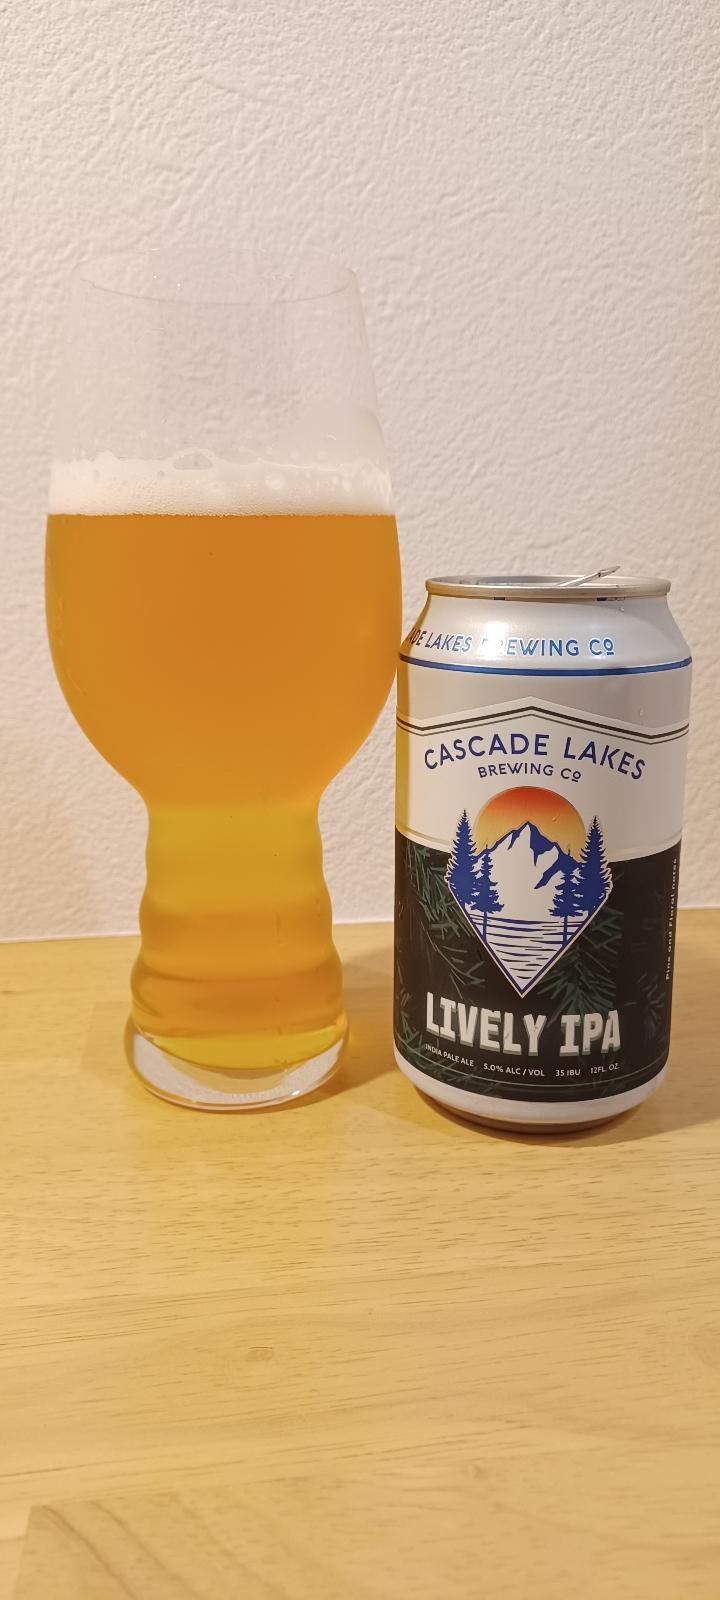 Lively IPA